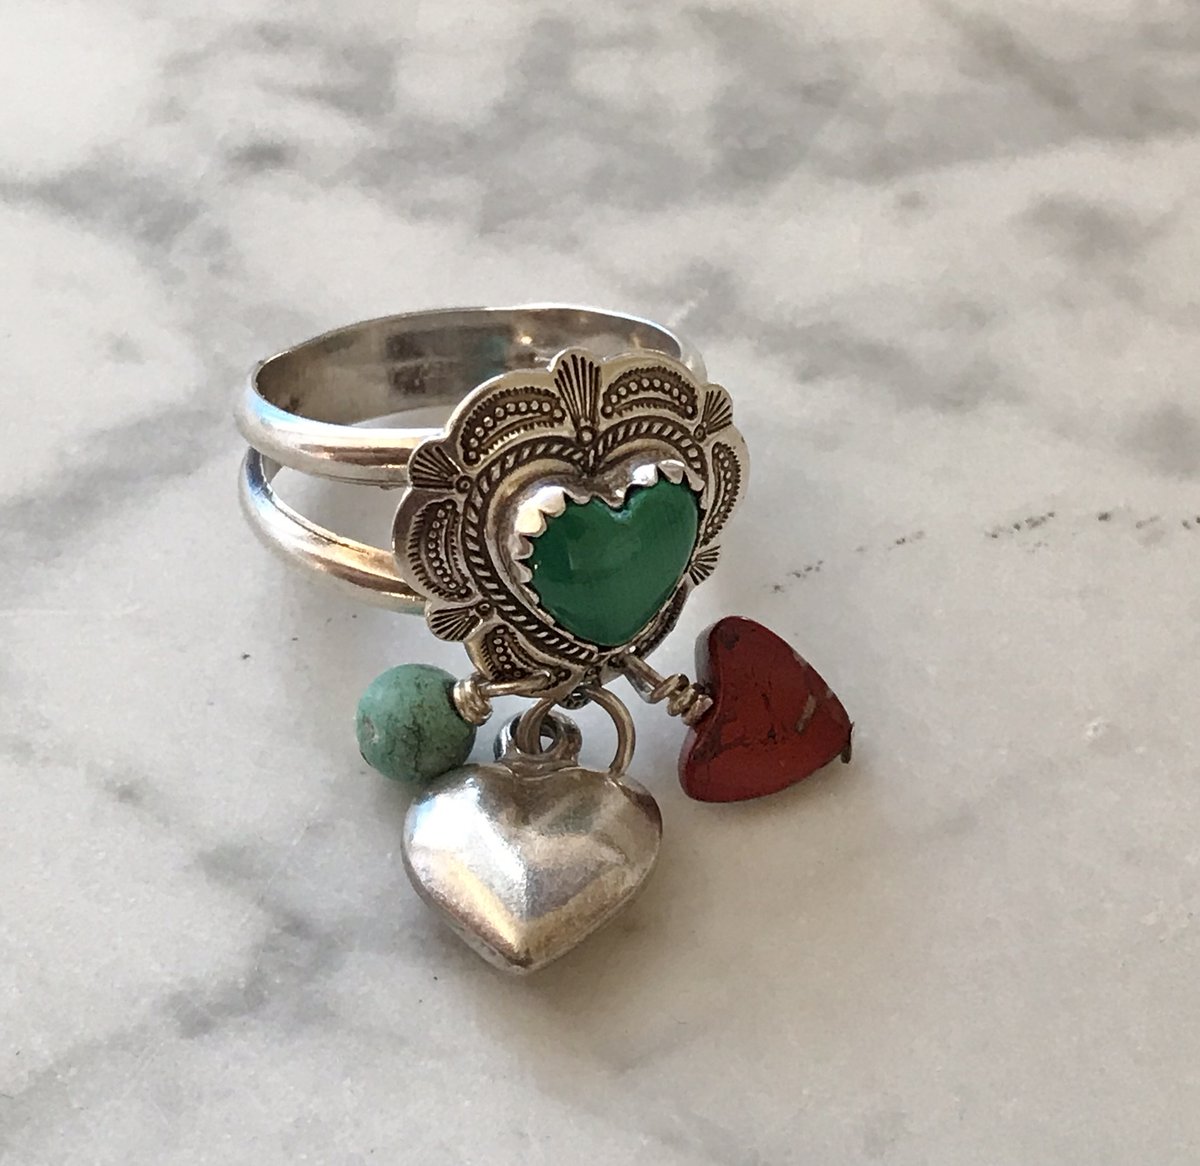 Lookit this AMAZING STERLiNG HEART RiNG with CHARMS by Carolyn Pollack.
 #NavajoLook #Malachite #JasPeR #vintageRing #WesTernRing #Southwestern #CarolyPollack #heartRing #sterlingRing
ETSY  ShanniLuJewelry
etsy.com/listing/153163…